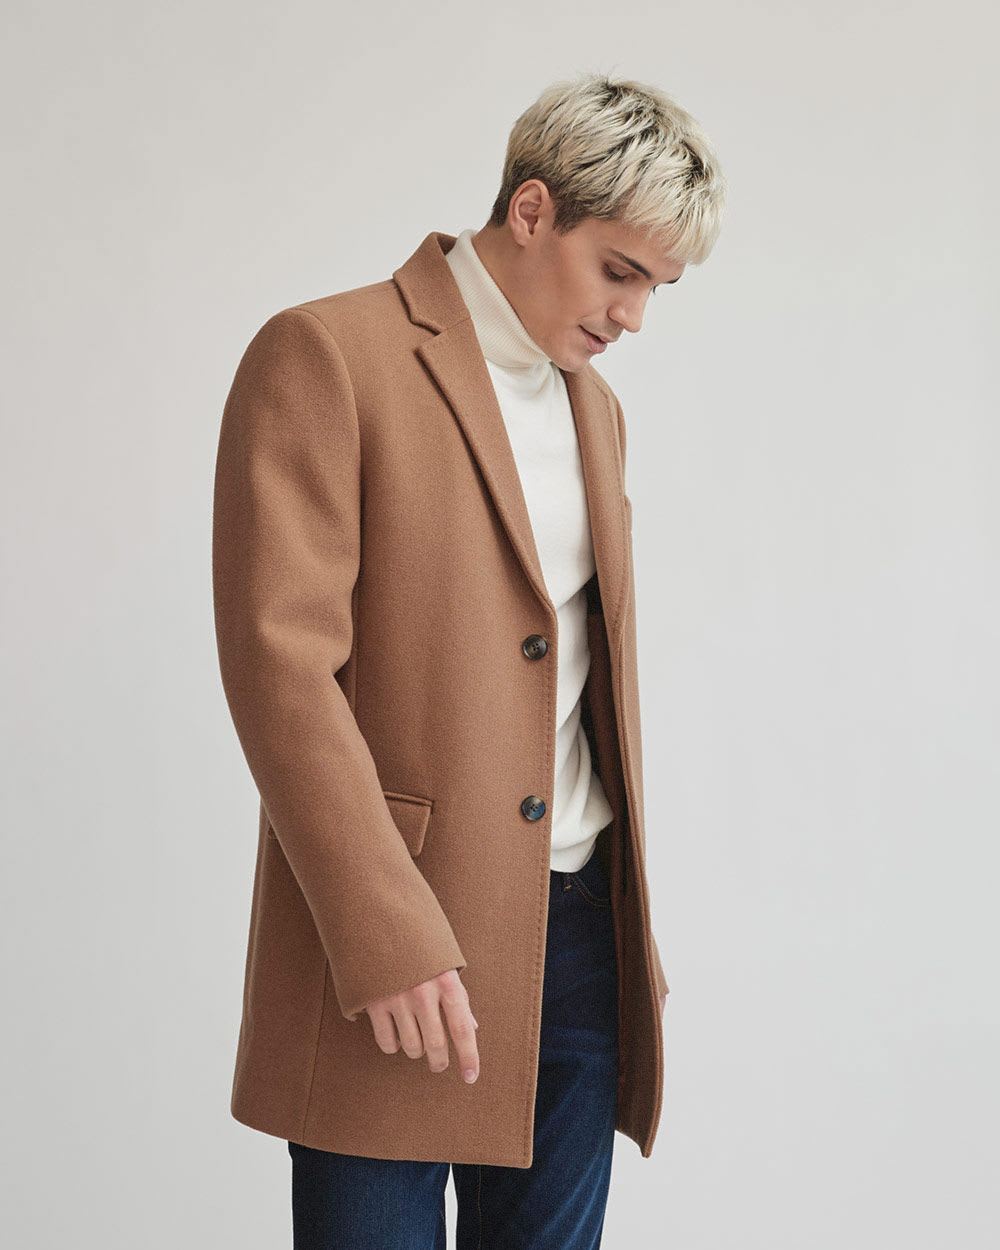 Camel Two Button Wool Jacket with Removable Dickie